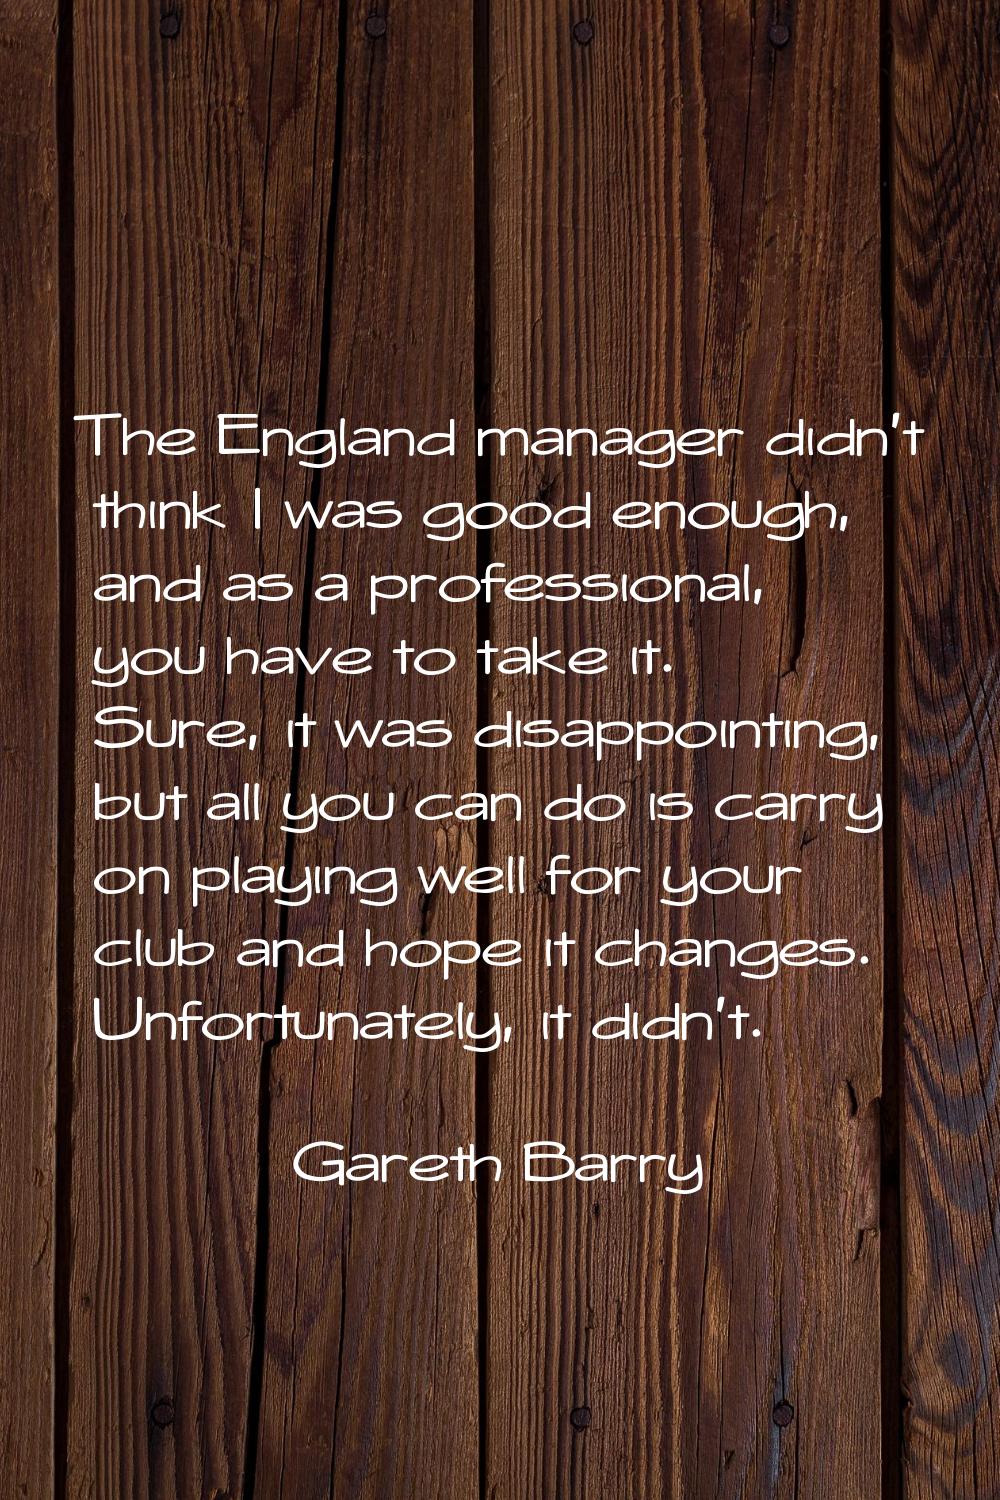 The England manager didn't think I was good enough, and as a professional, you have to take it. Sur